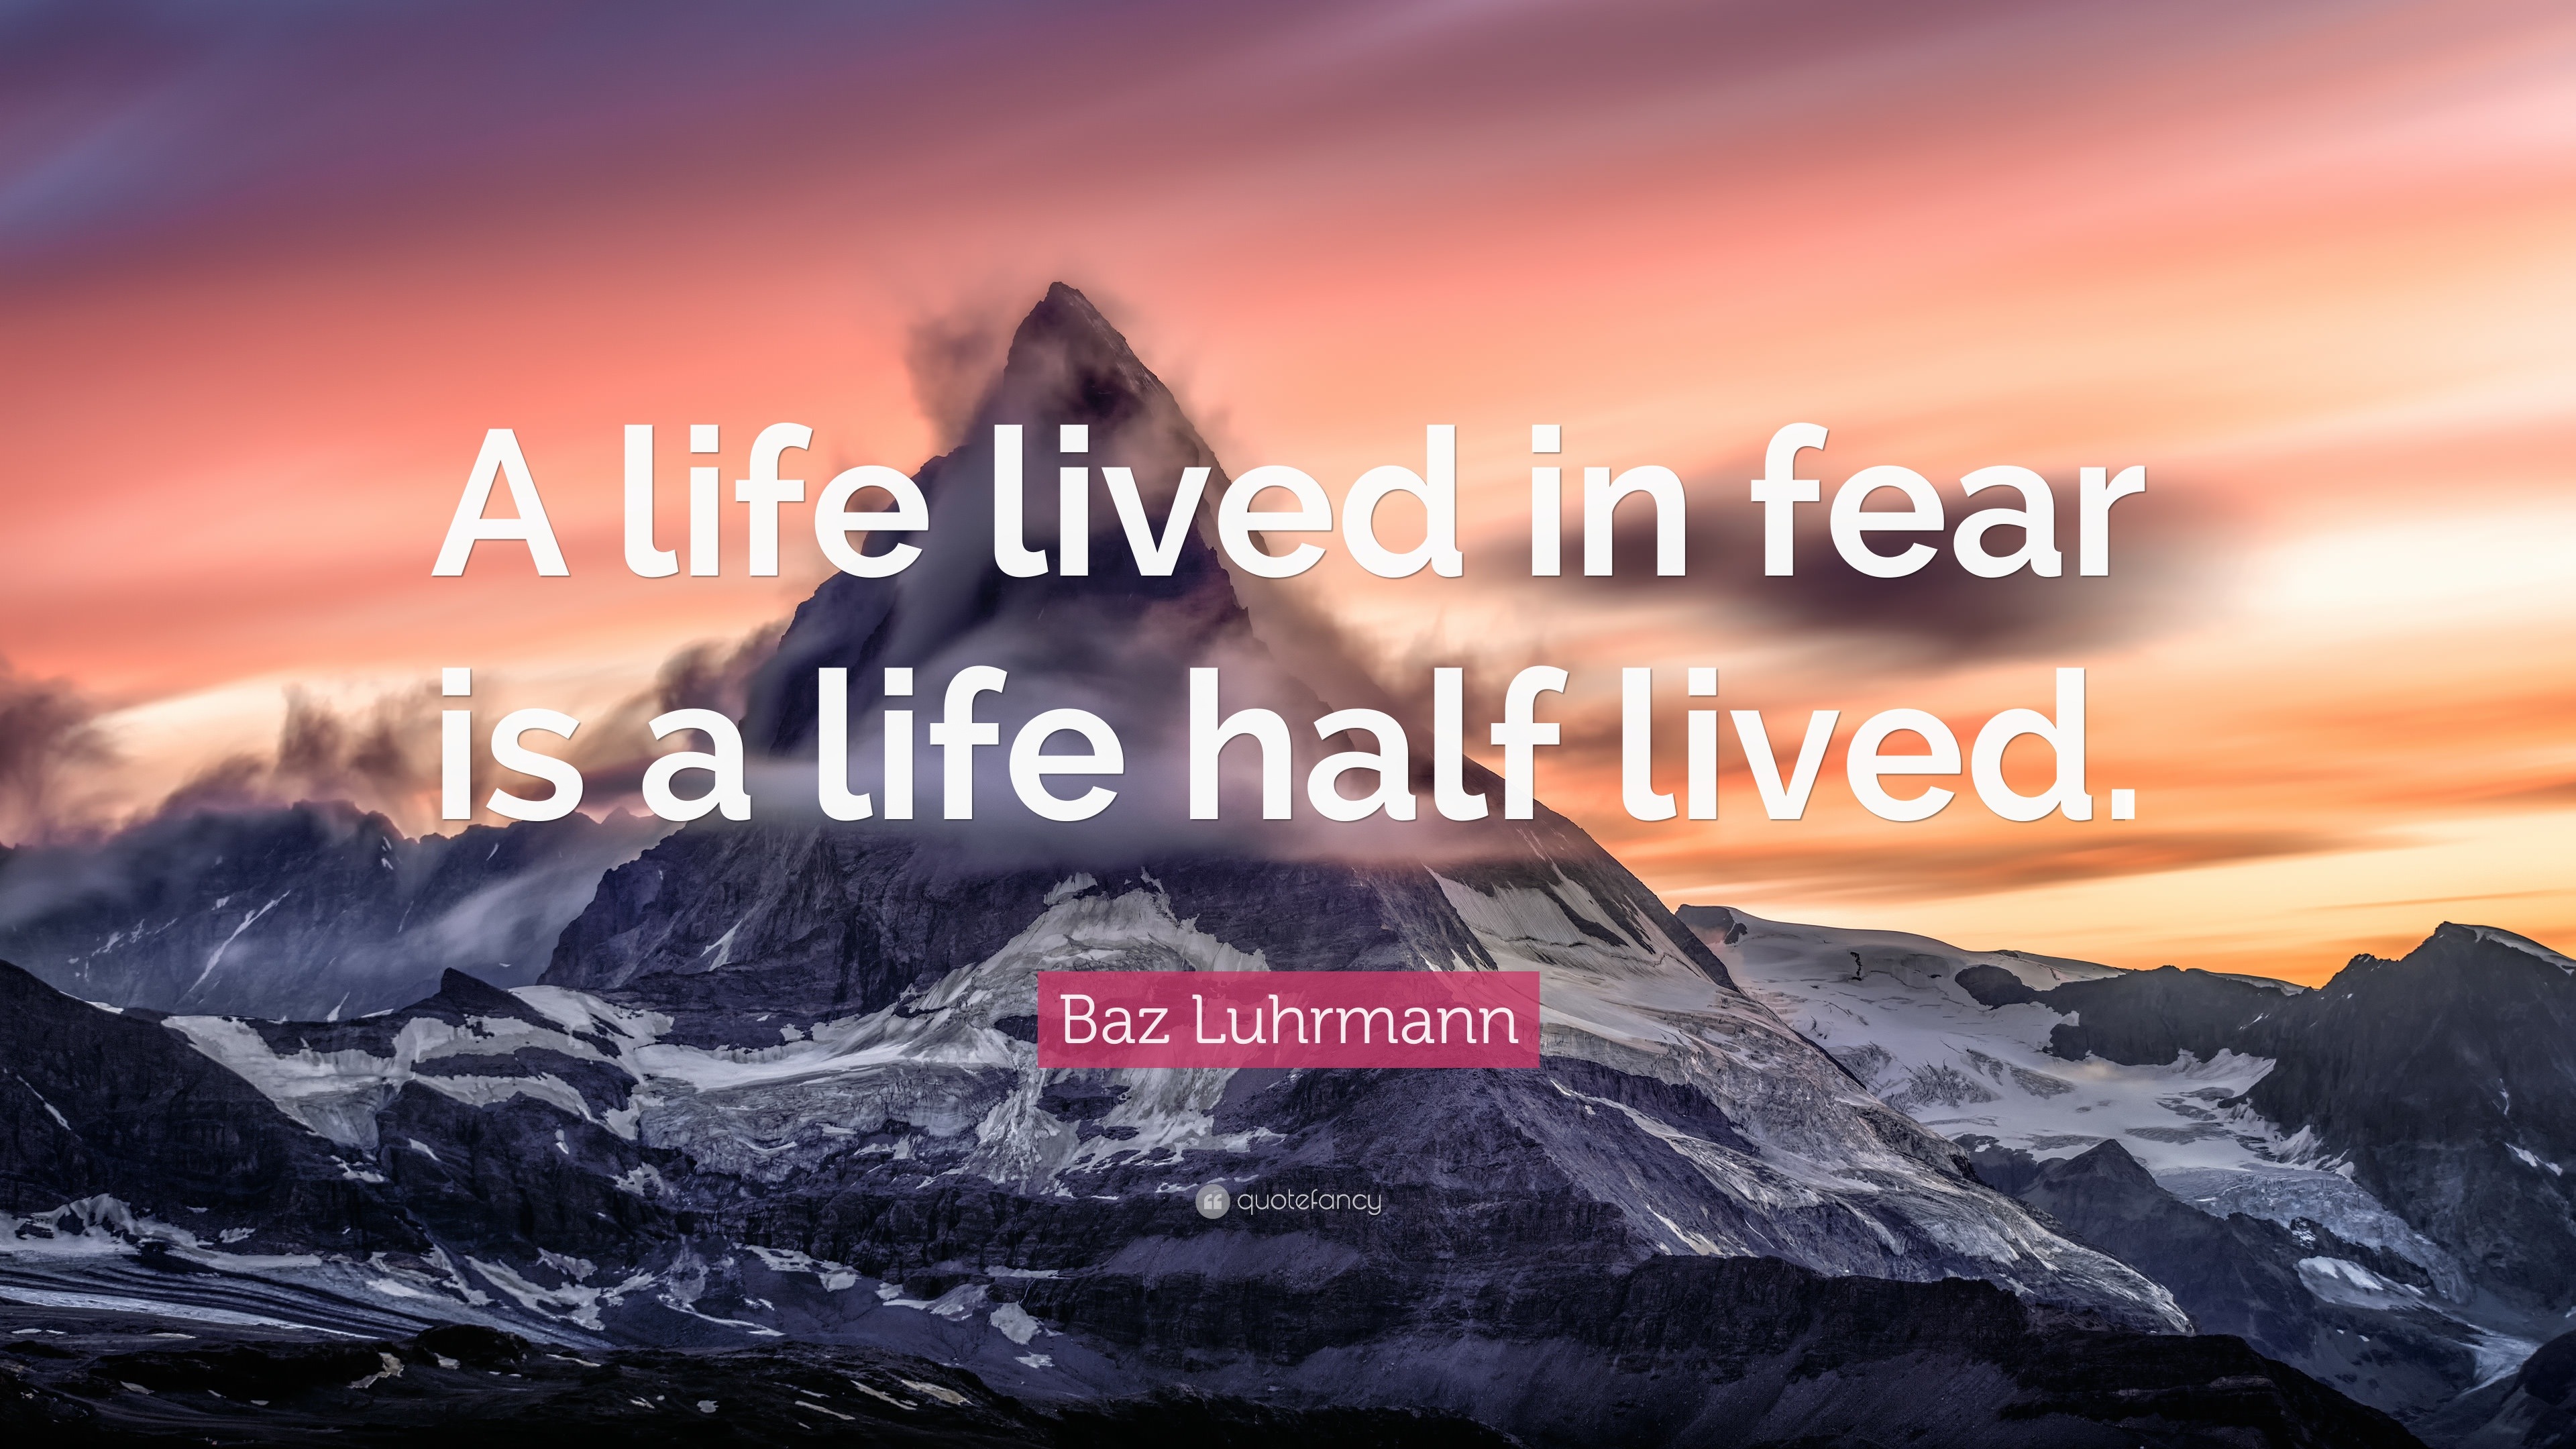 Baz Luhrmann Quote “A life lived in fear is a life half lived